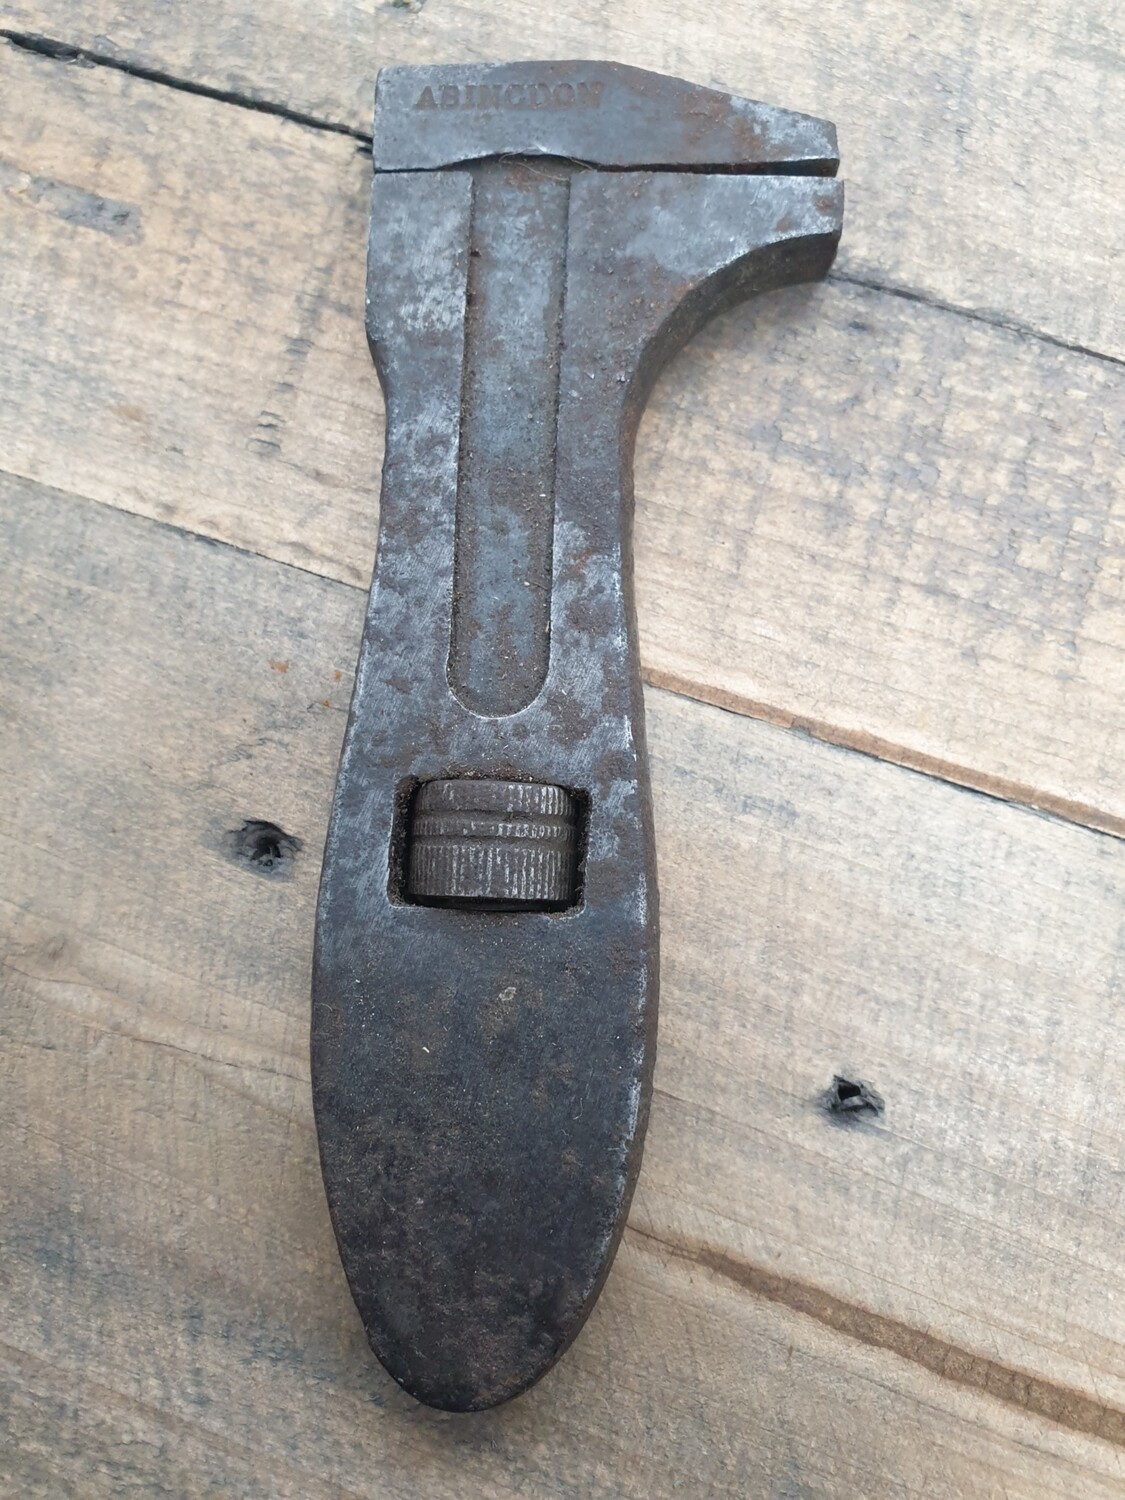 ABINGDON VINTAGE FISH BELLY WRENCH